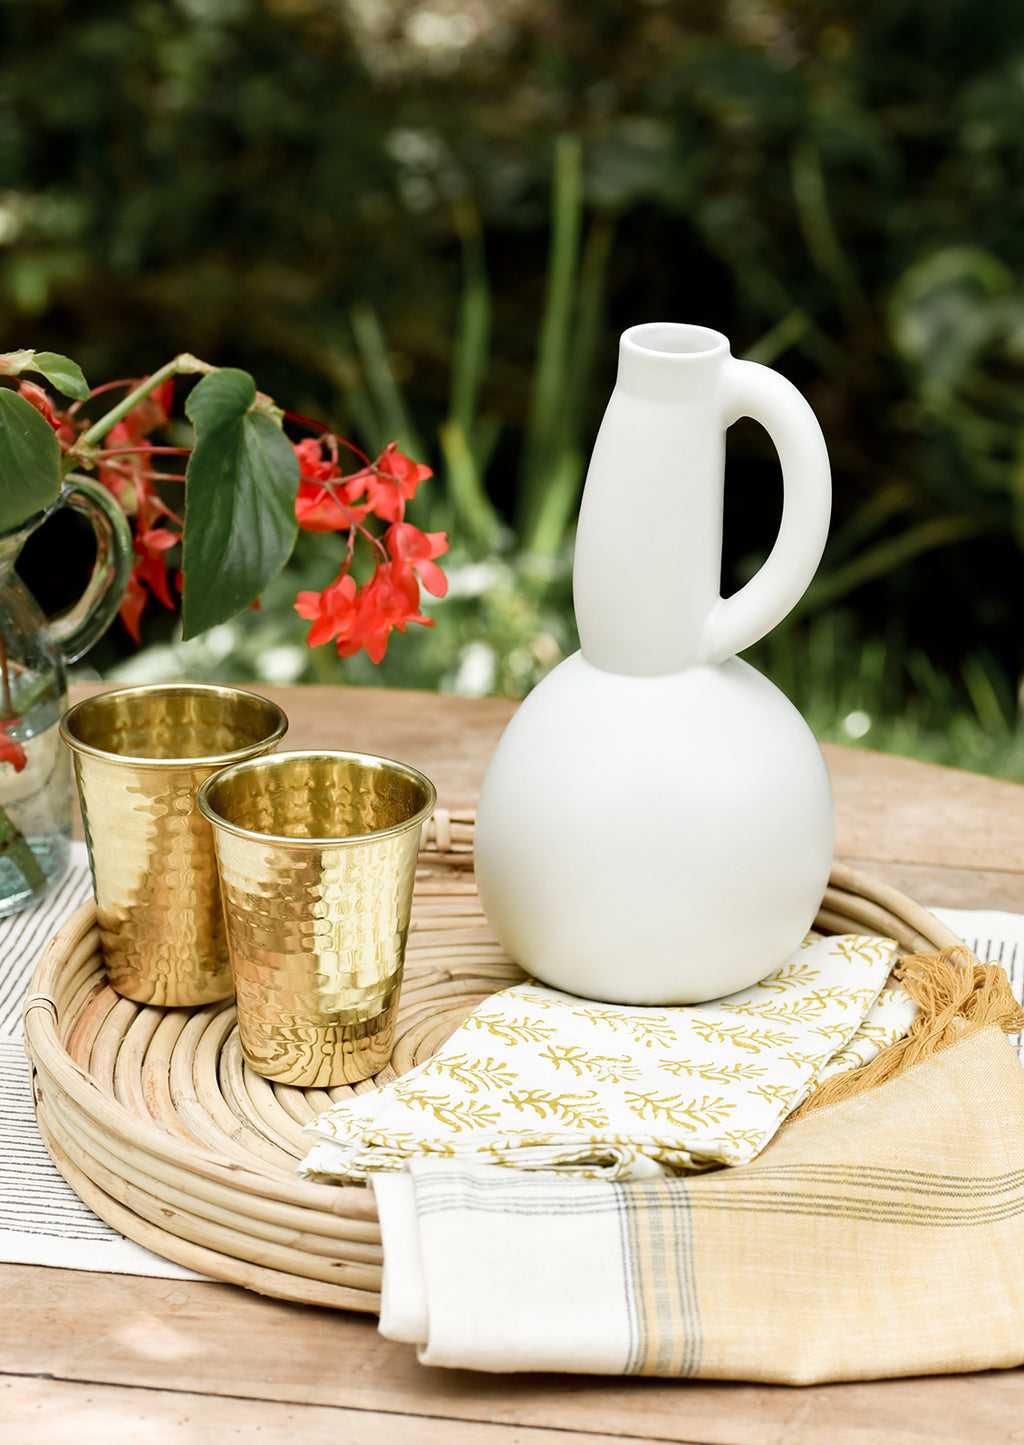 2: A table setting with ceramic pitcher and brass cups.